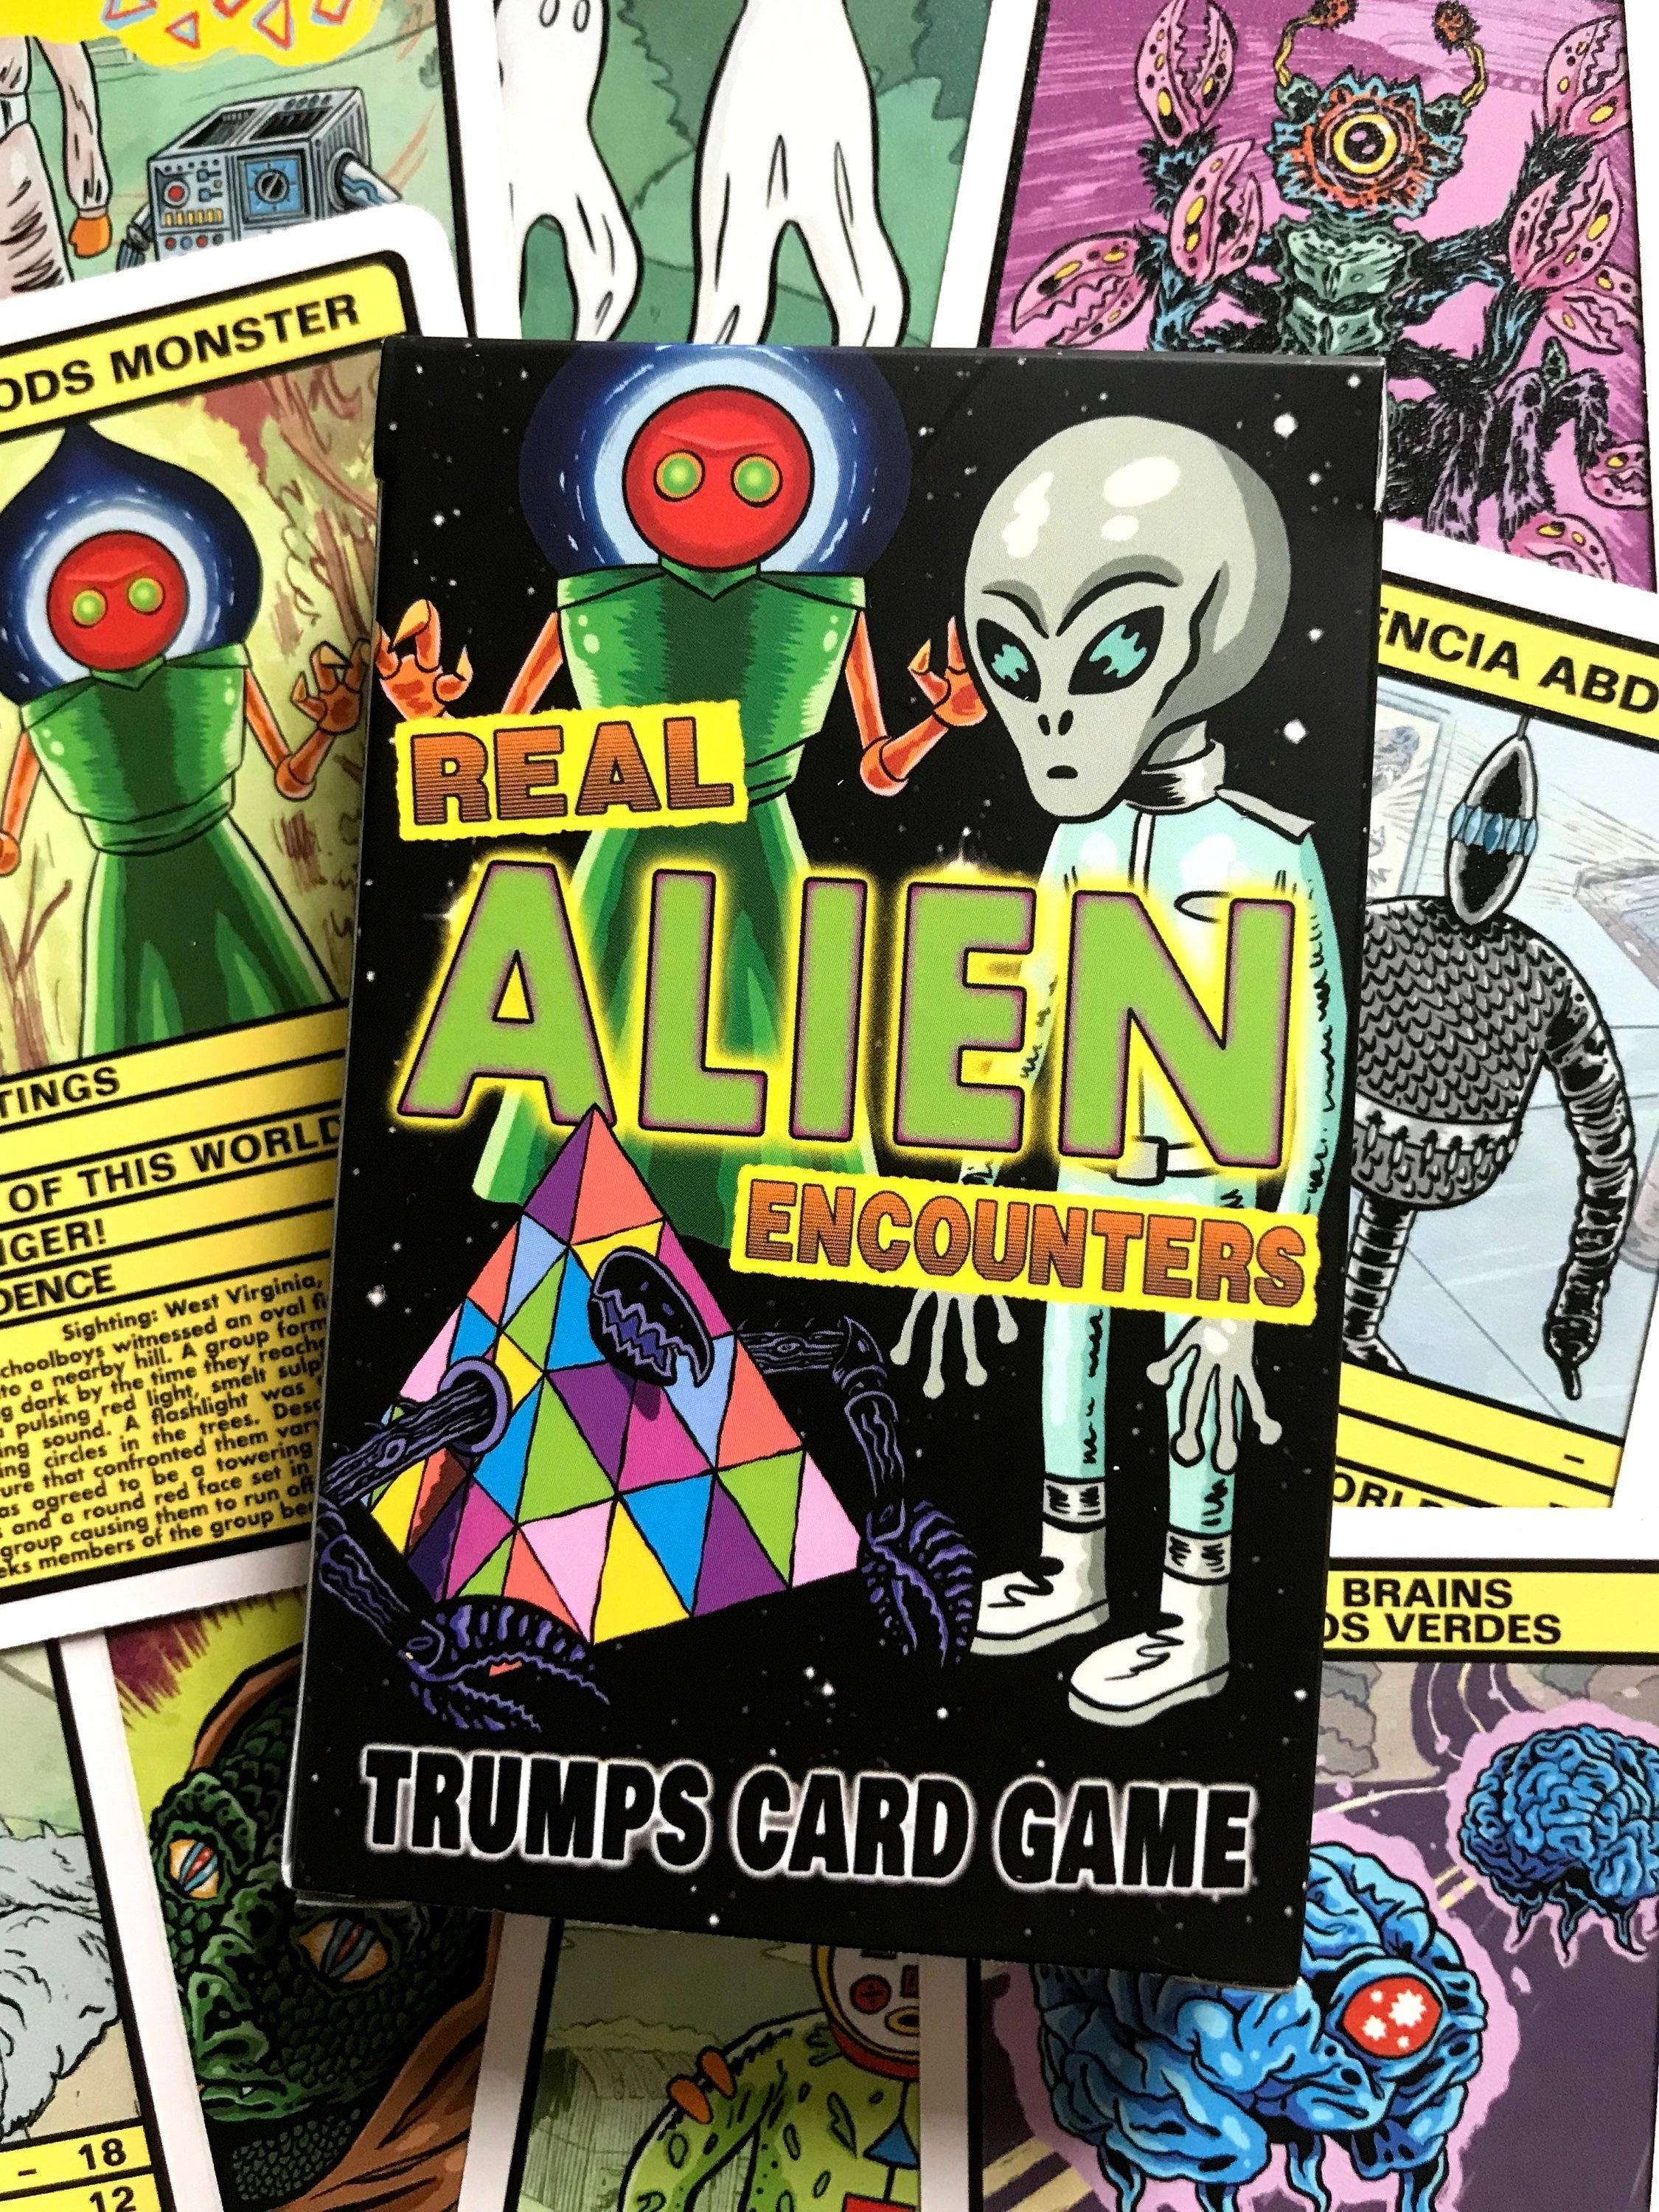 REAL ALIEN ENCOUNTERS Trumps Card Game aliens Ufos Flatwoods